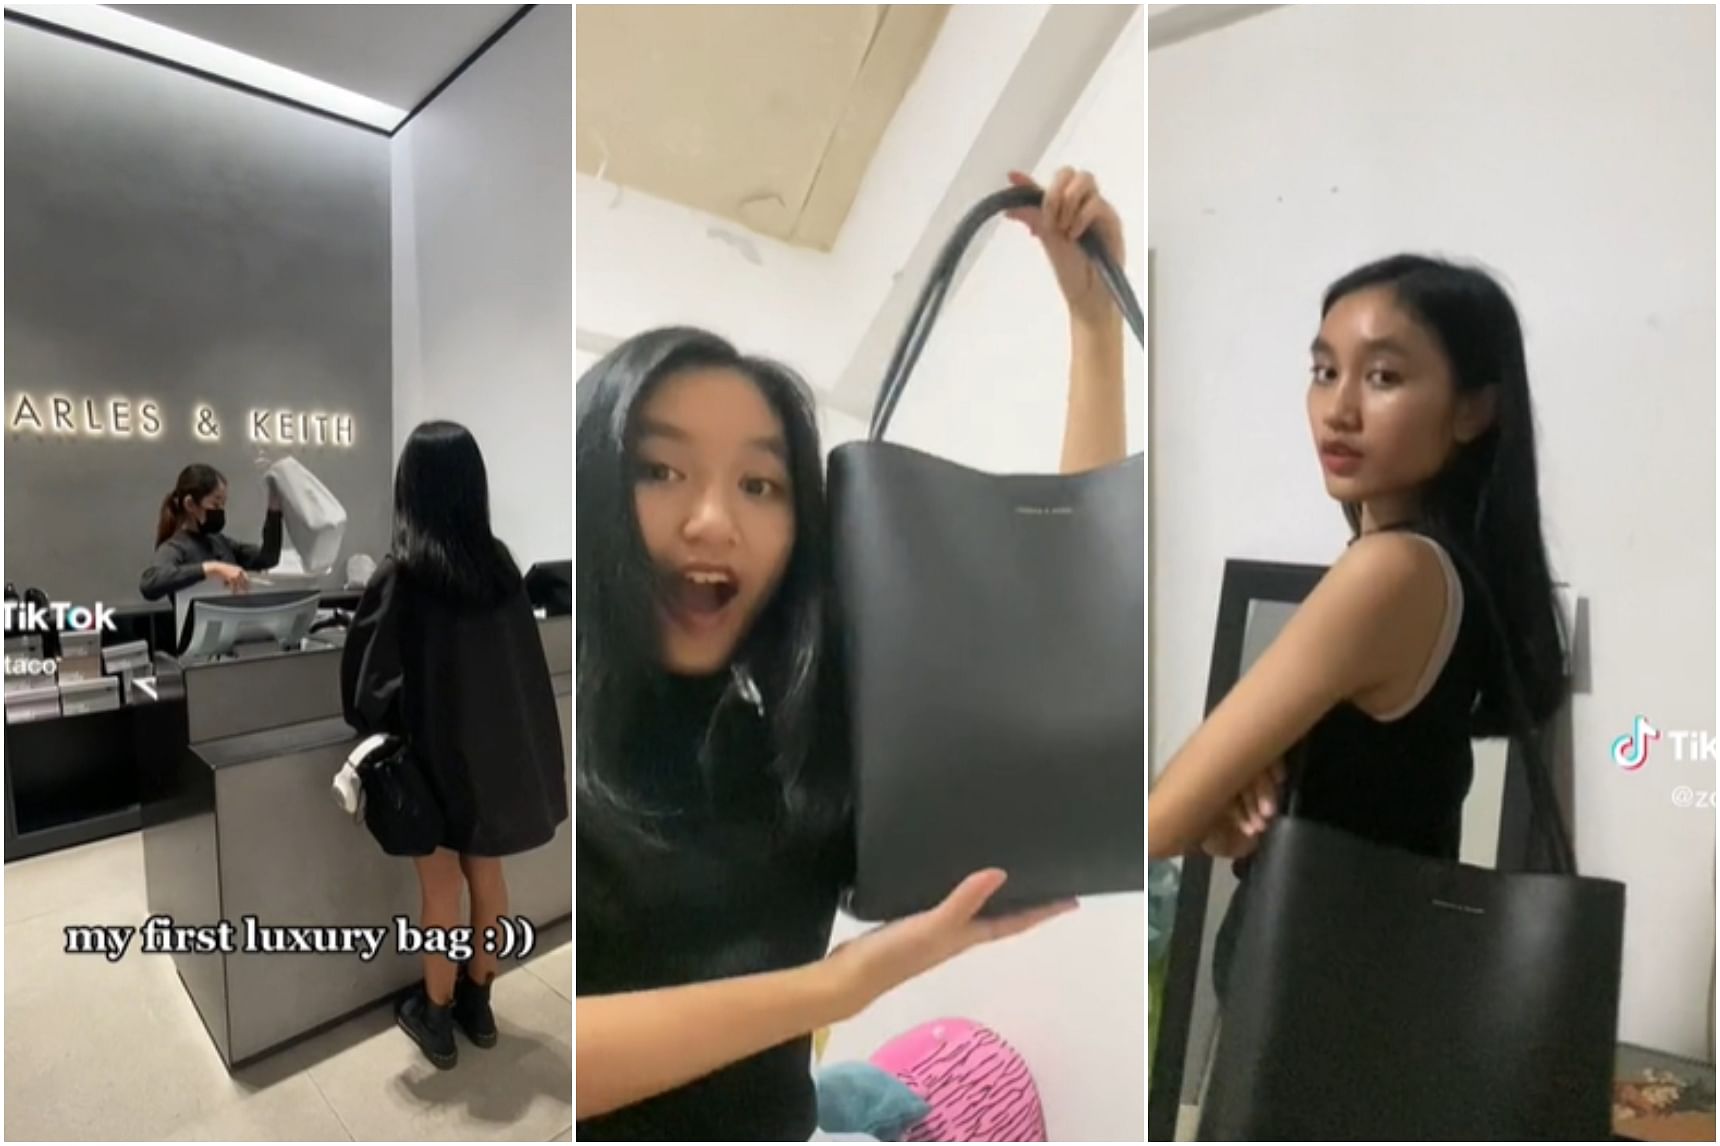 Teen mocked for calling Charles & Keith bag a 'luxury' item